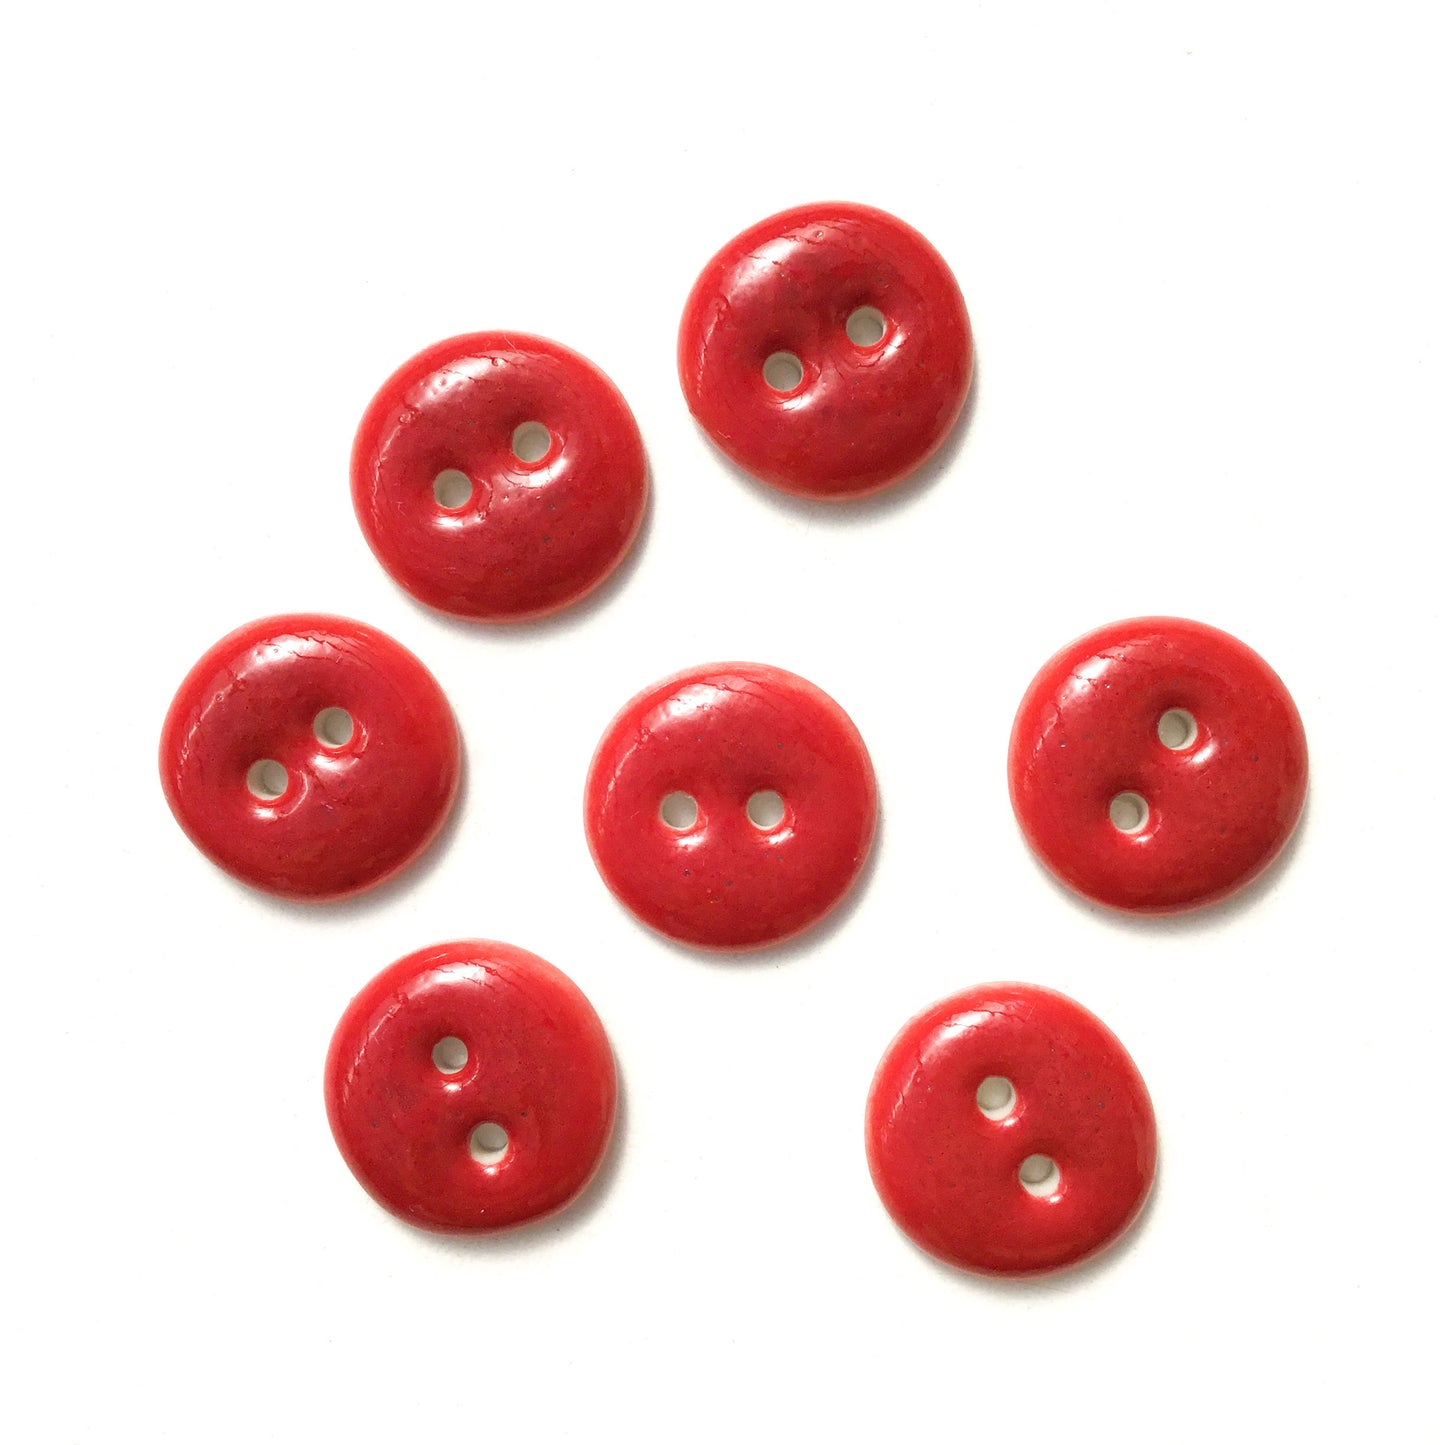 Deep Cherry Red Porcelain Buttons - Red Ceramic Buttons - 11/16" - 7 Pack